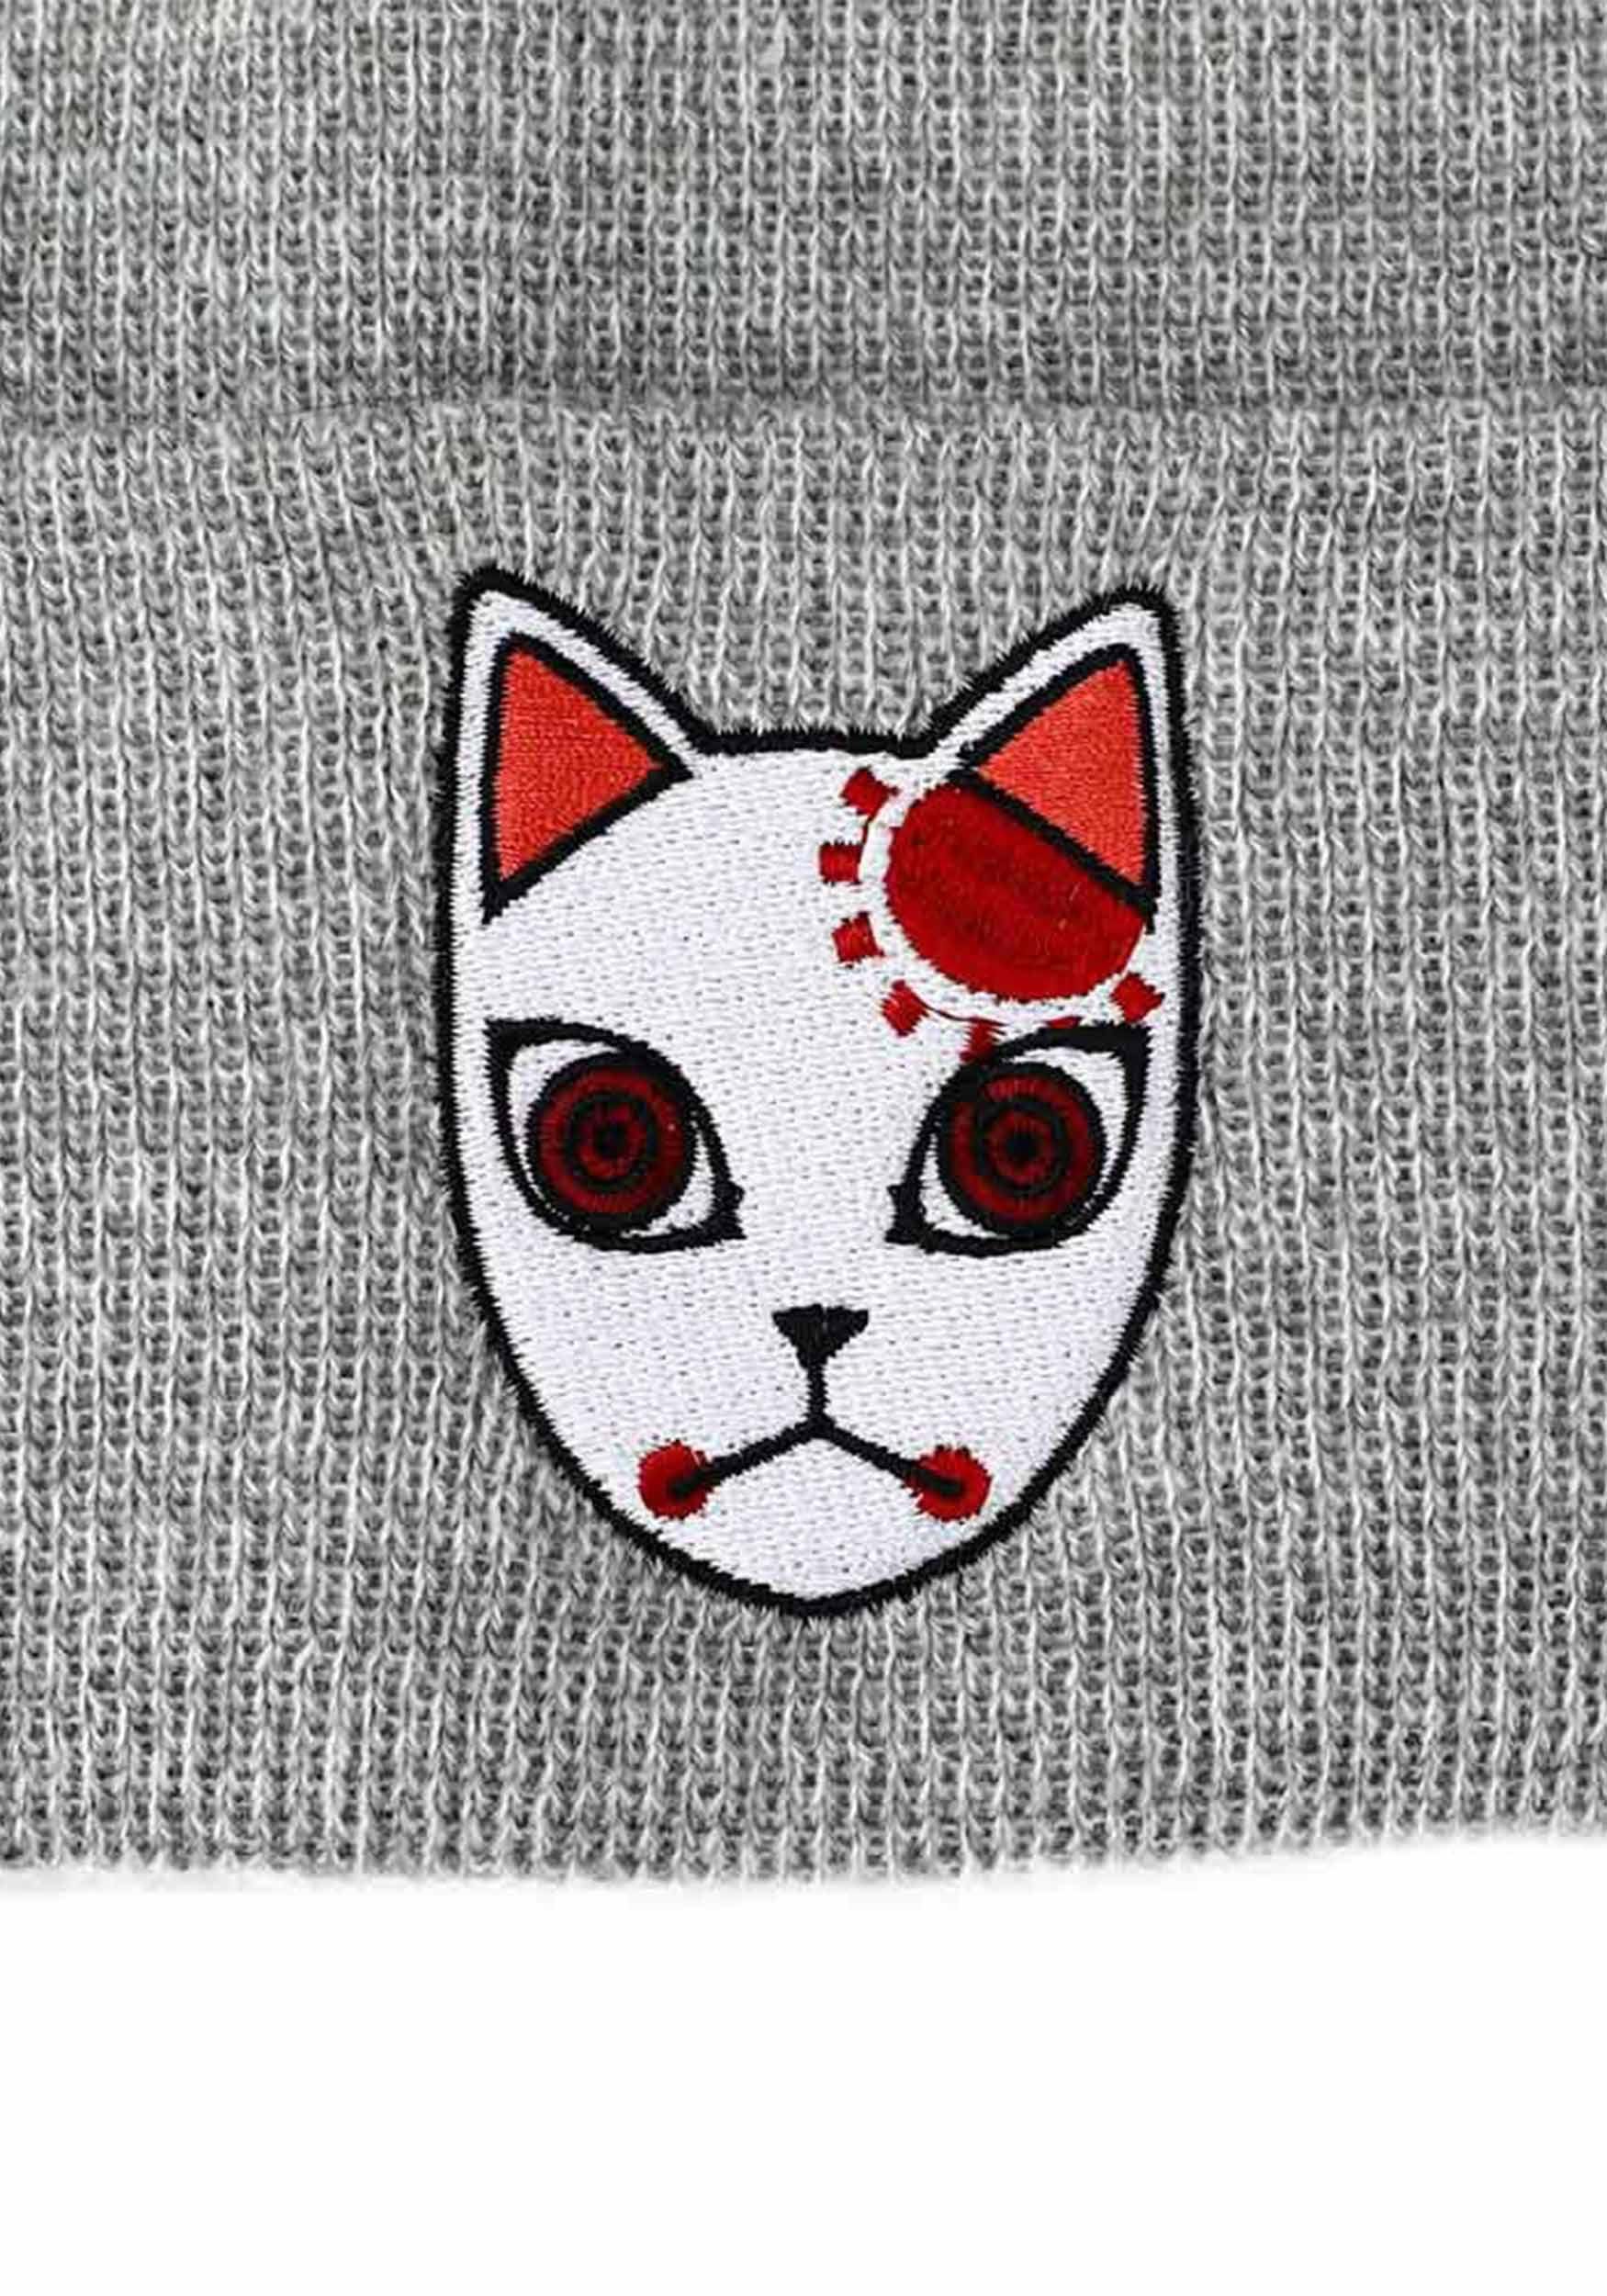 Demon Slayer Fox Mask Embroidered Cuff Beanie For Adults